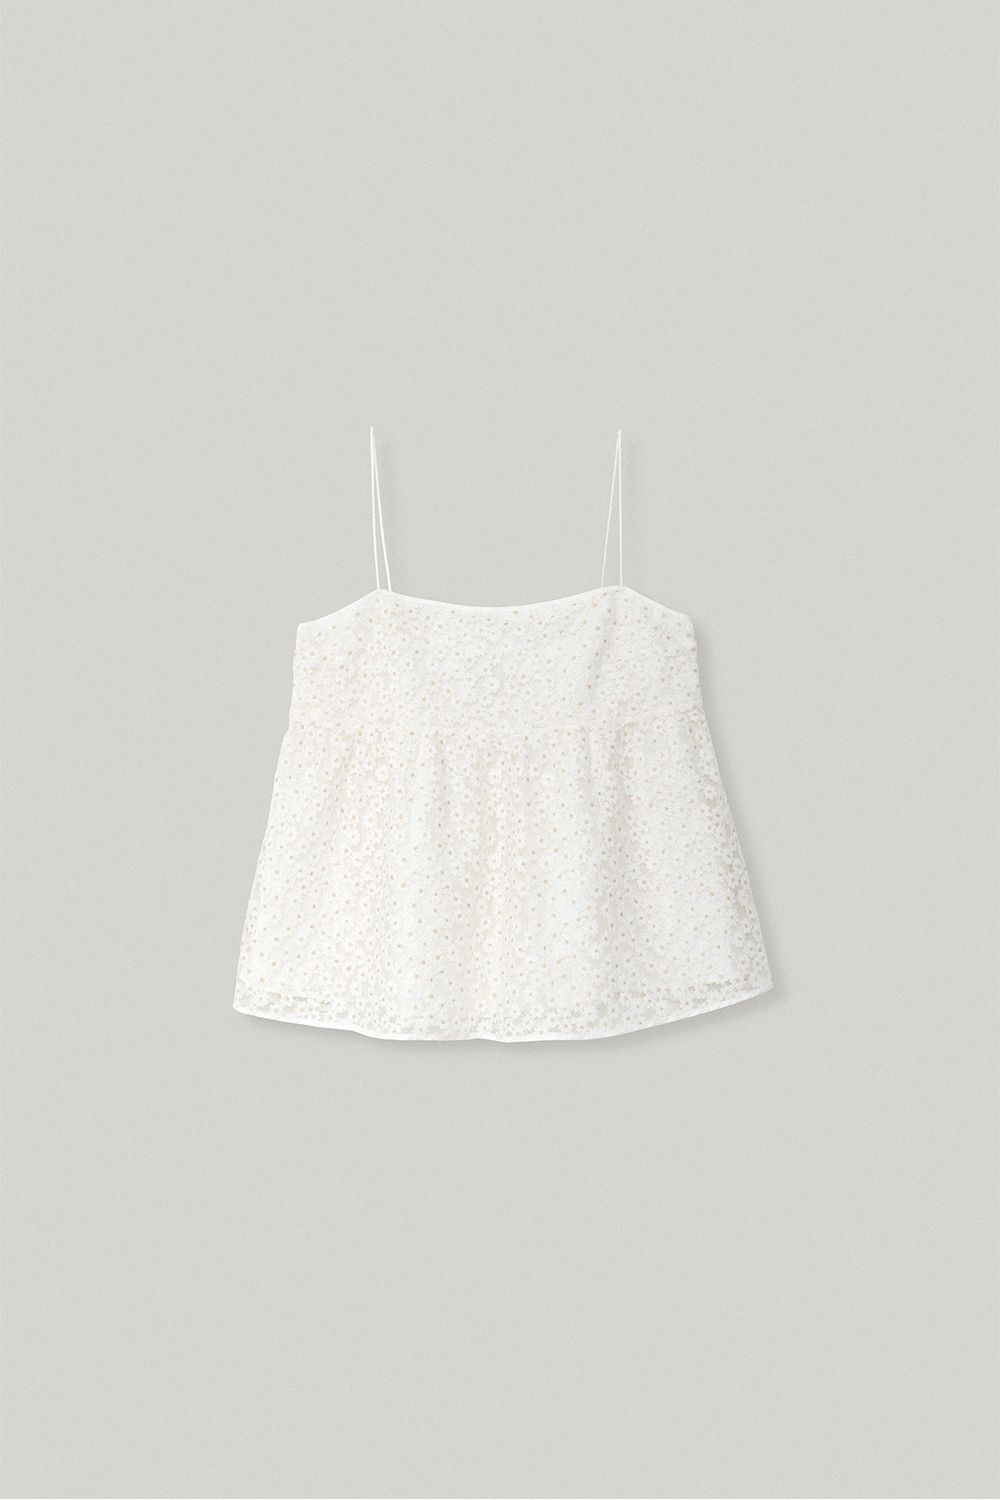 [4 REORDER] Ivy Embroidery Top in White (4/26일 예약배송)